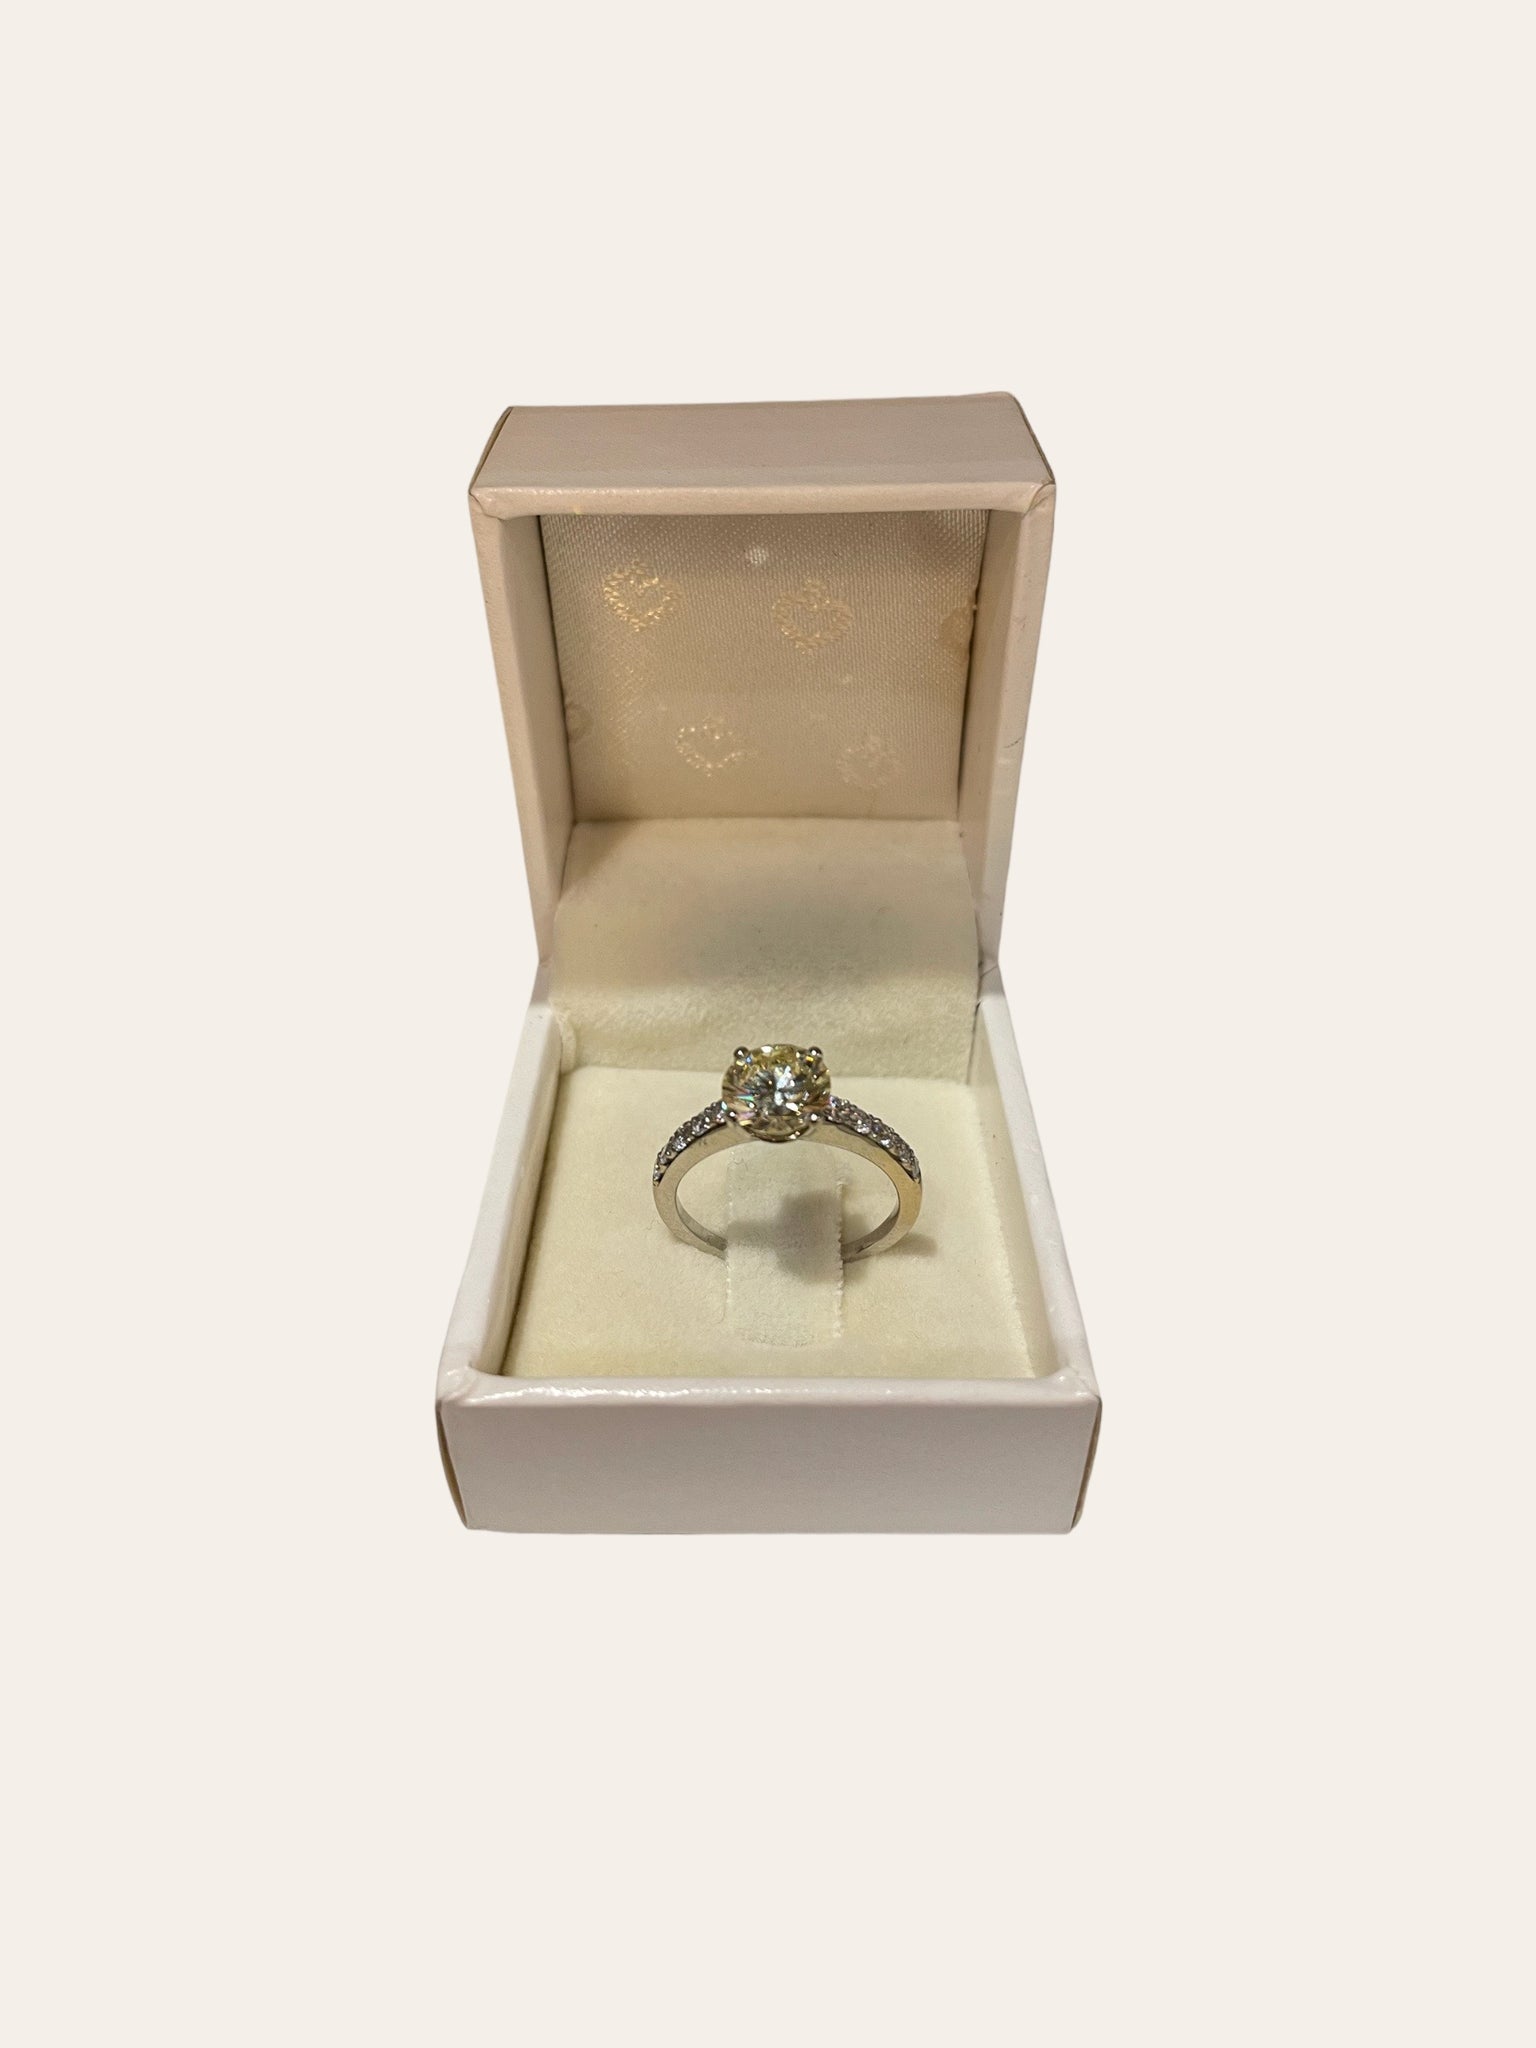 14K White gold solitaire with half alliance ring set with 2.1 ct brilliant cut diamond